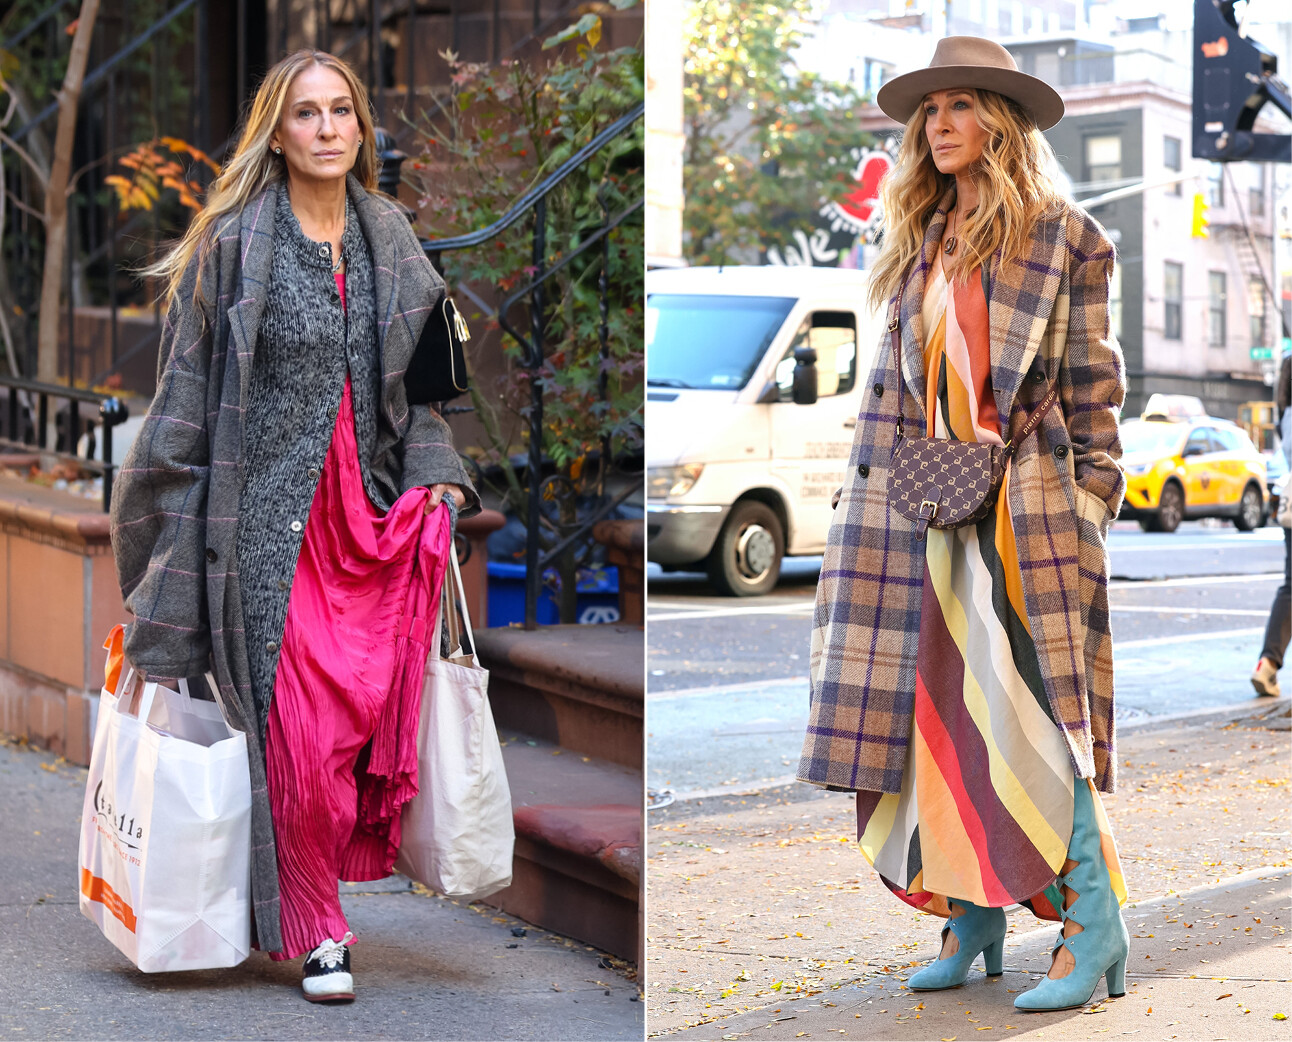 The looks van Sarah Jessica Parker in And Just Like That